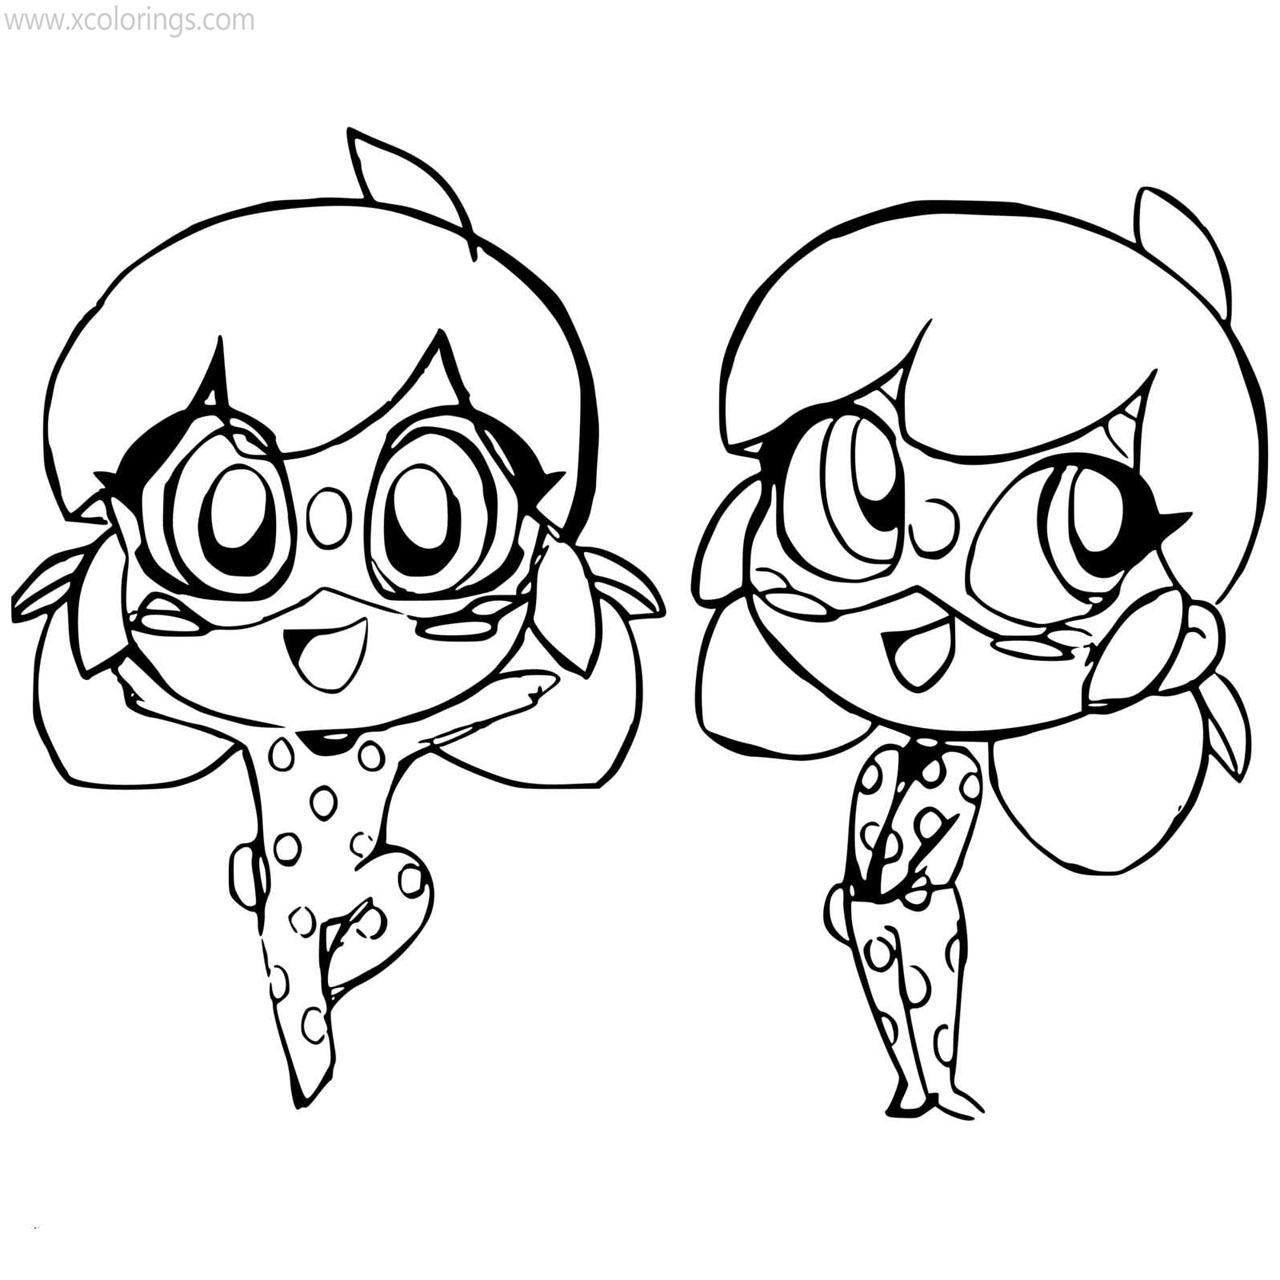 Free Cute Chibi Miraculous Ladybug Coloring Pages printable